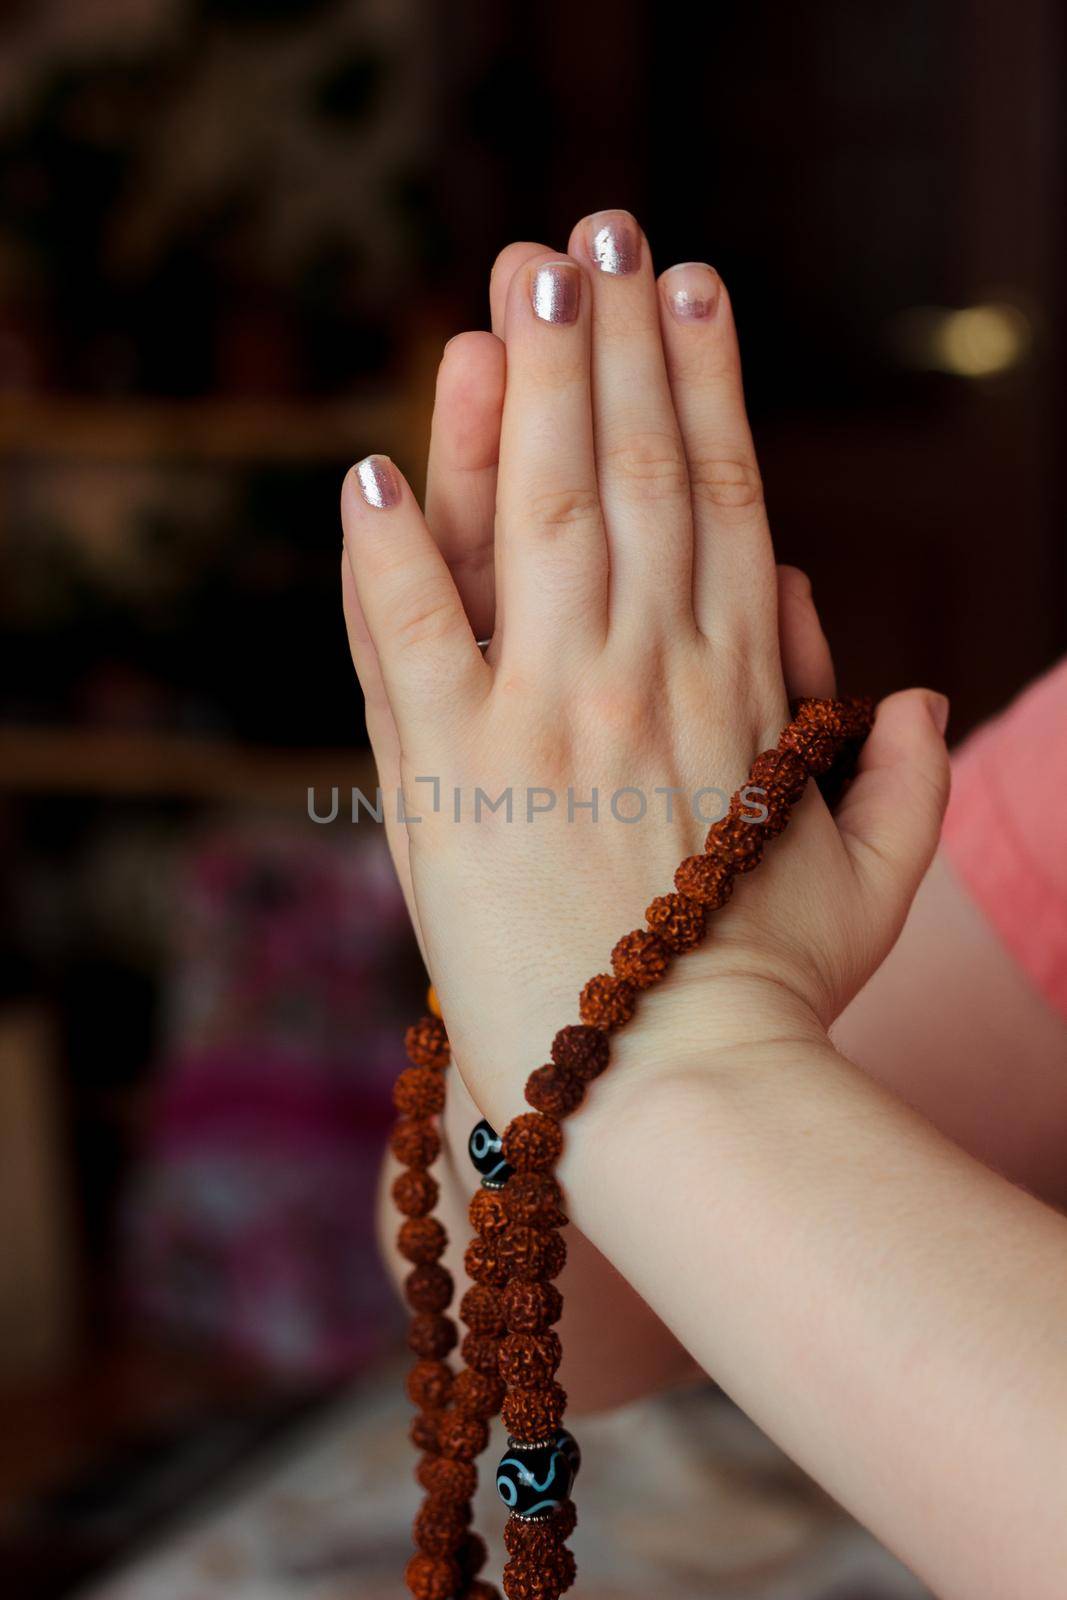 Woman hands holding rudraksha rosary with the namaste mudra